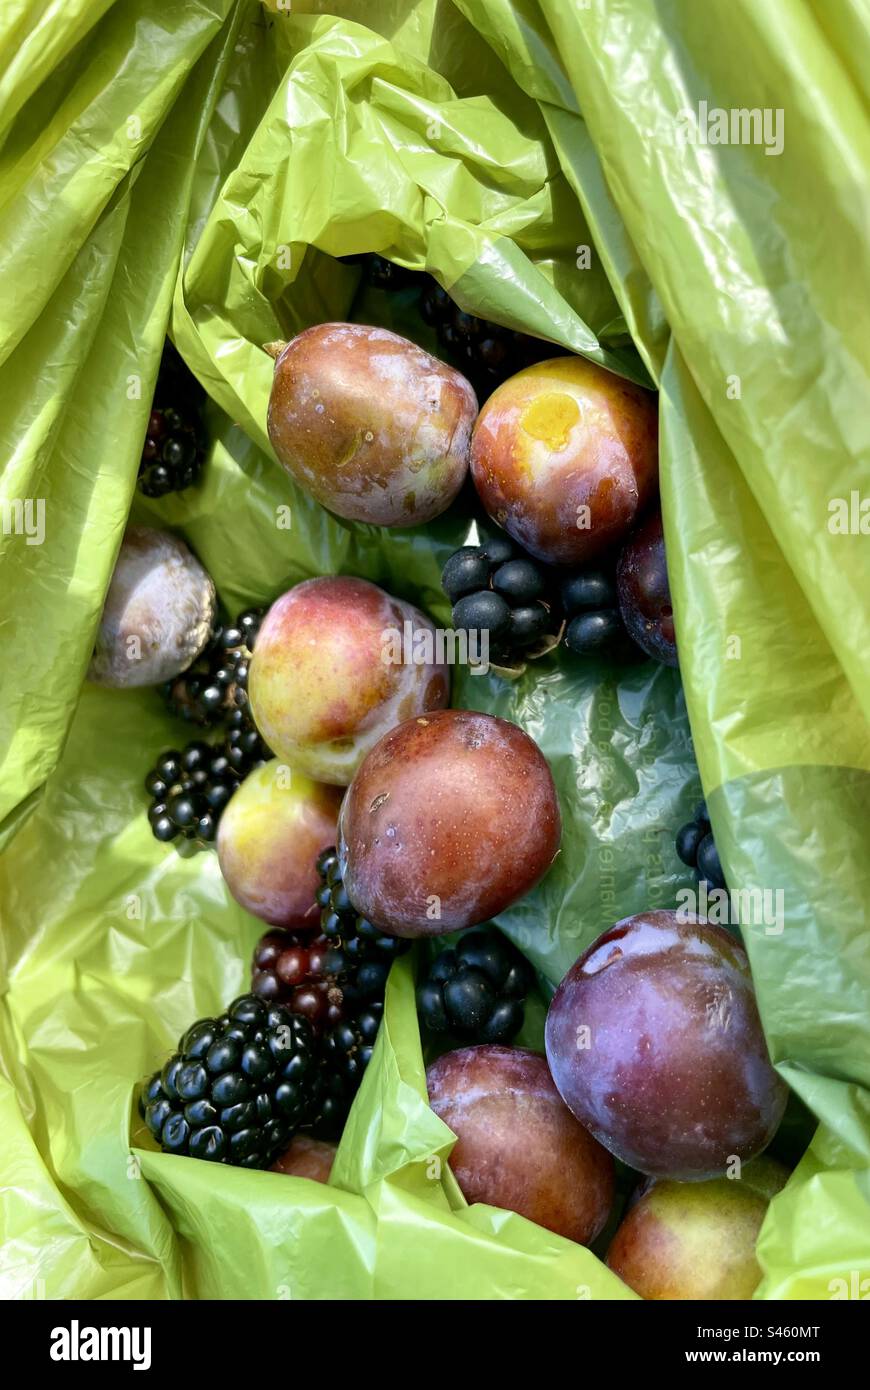 Foraging fruit in a dog poo bag! Stock Photo